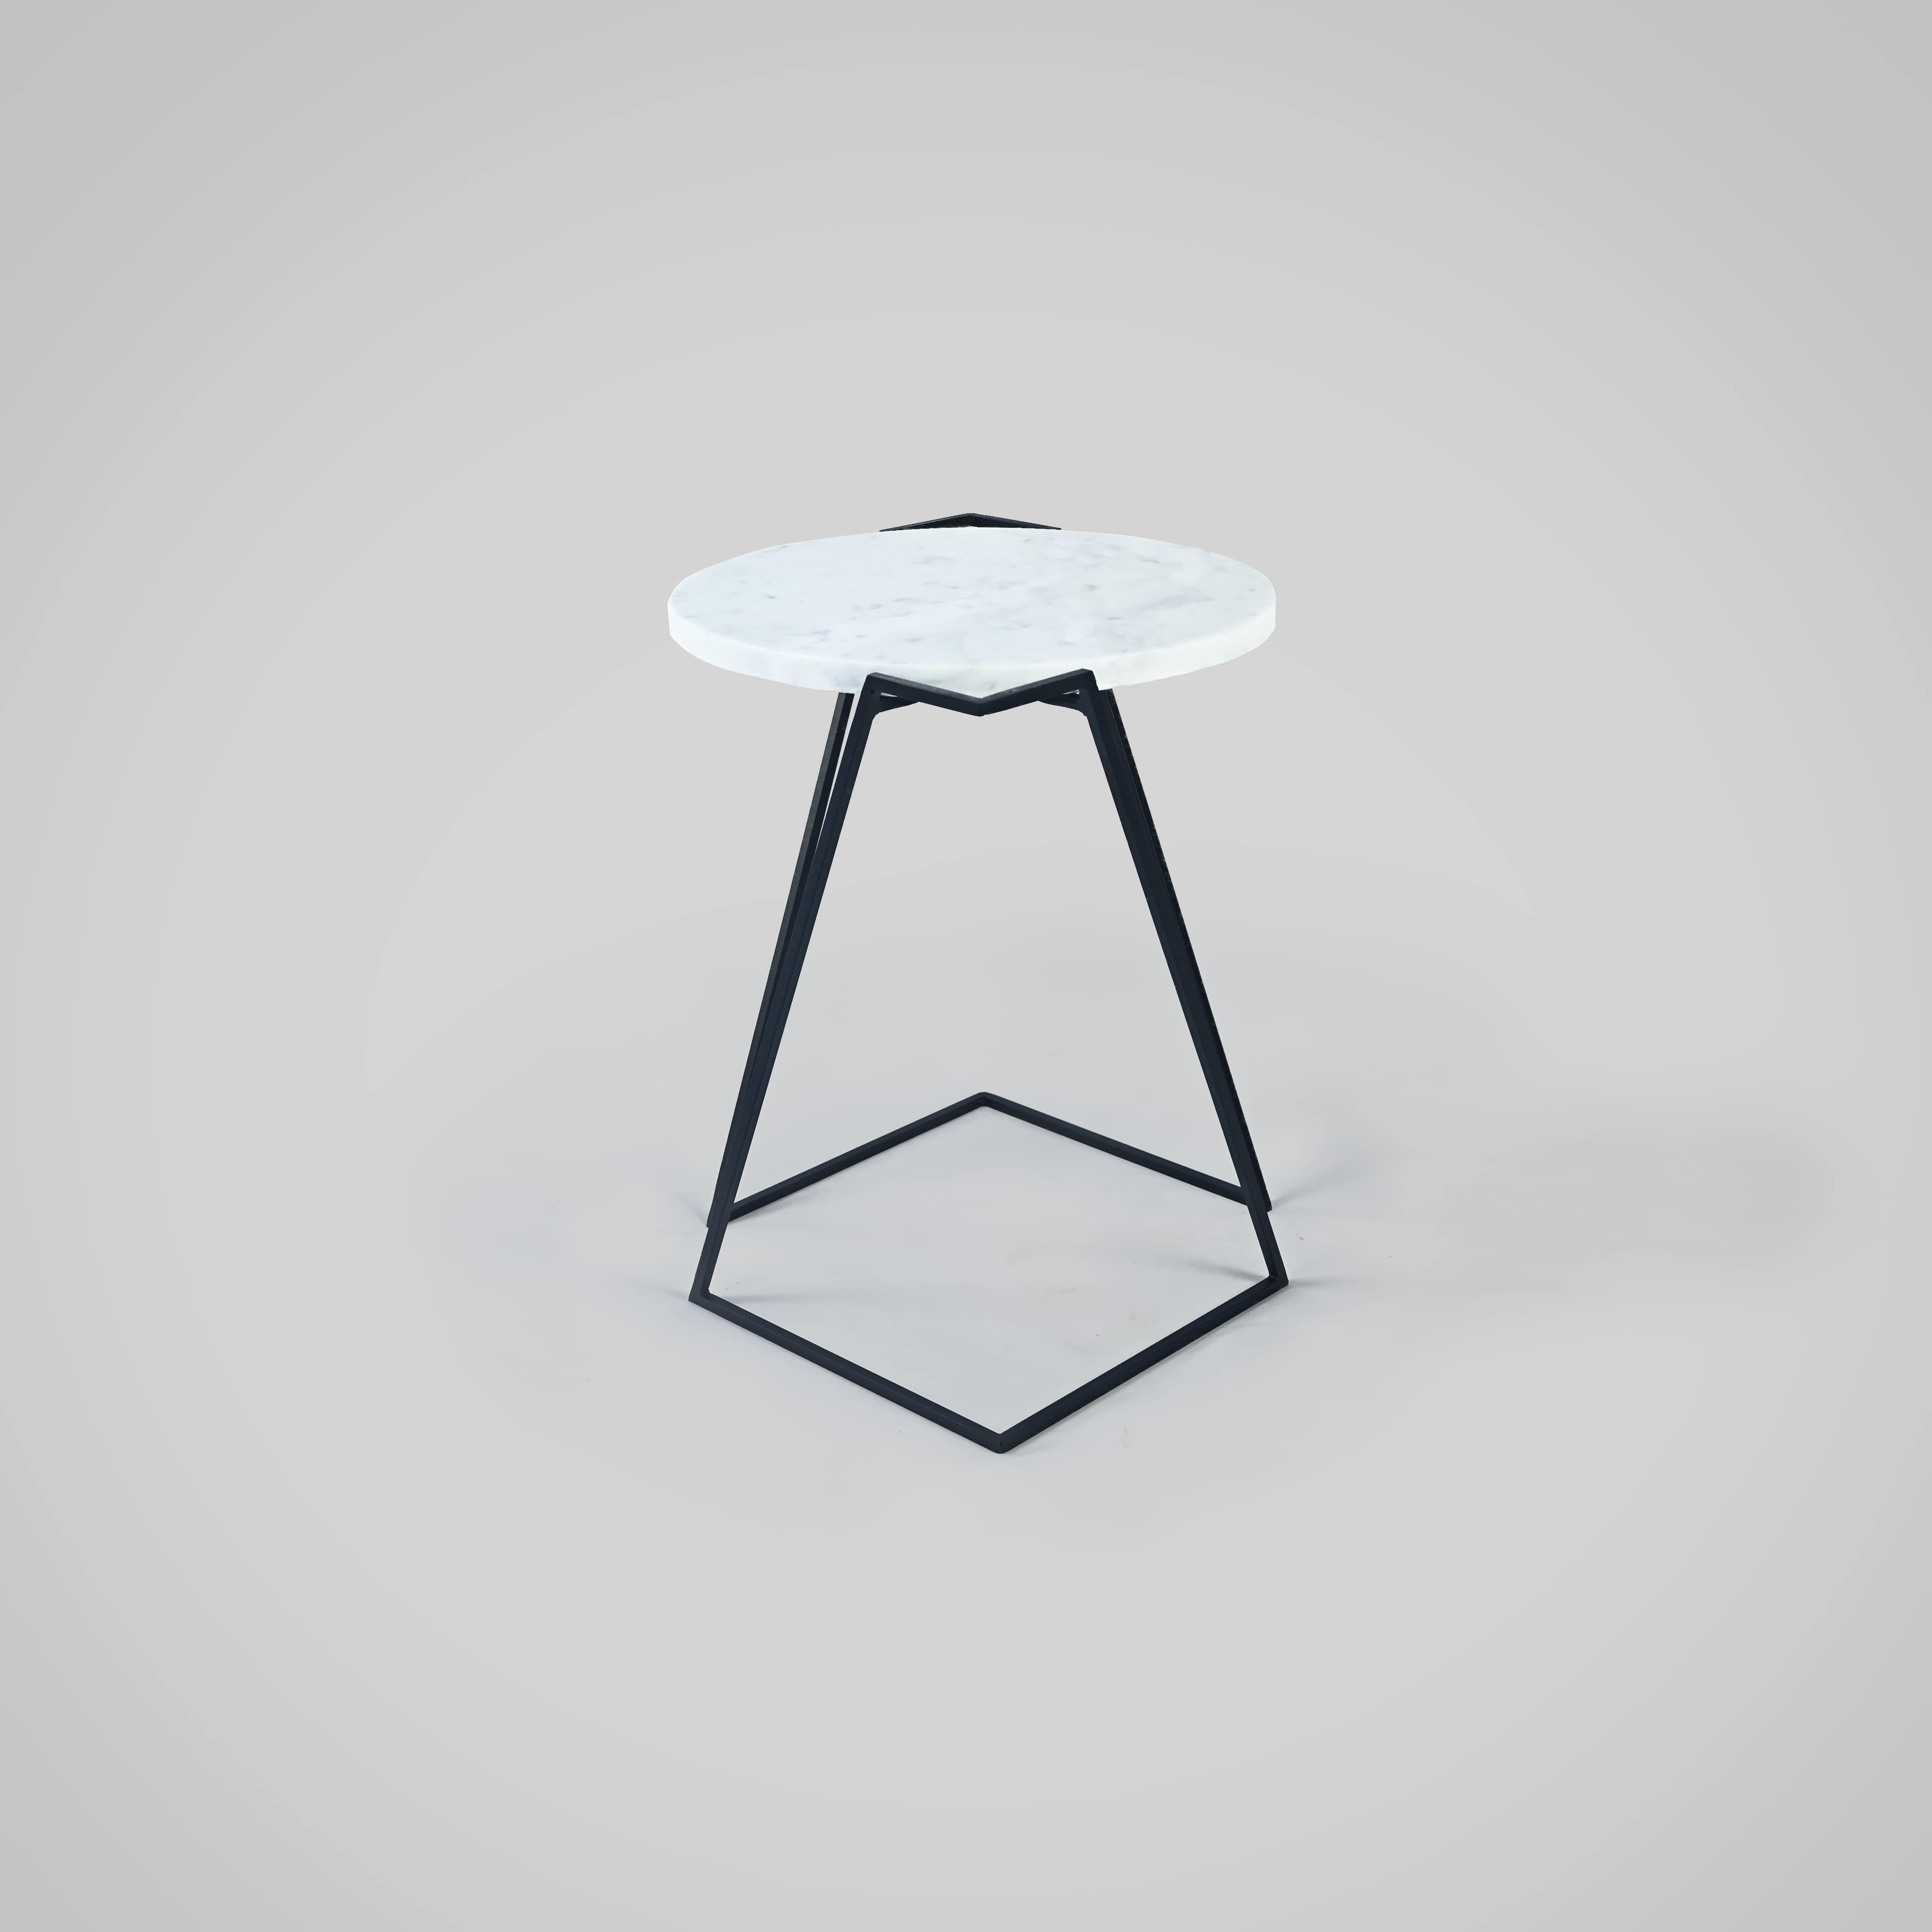 Minimalist Saturno, Carrara Marble Side Table By DFdesignlab Handmade in Italy For Sale